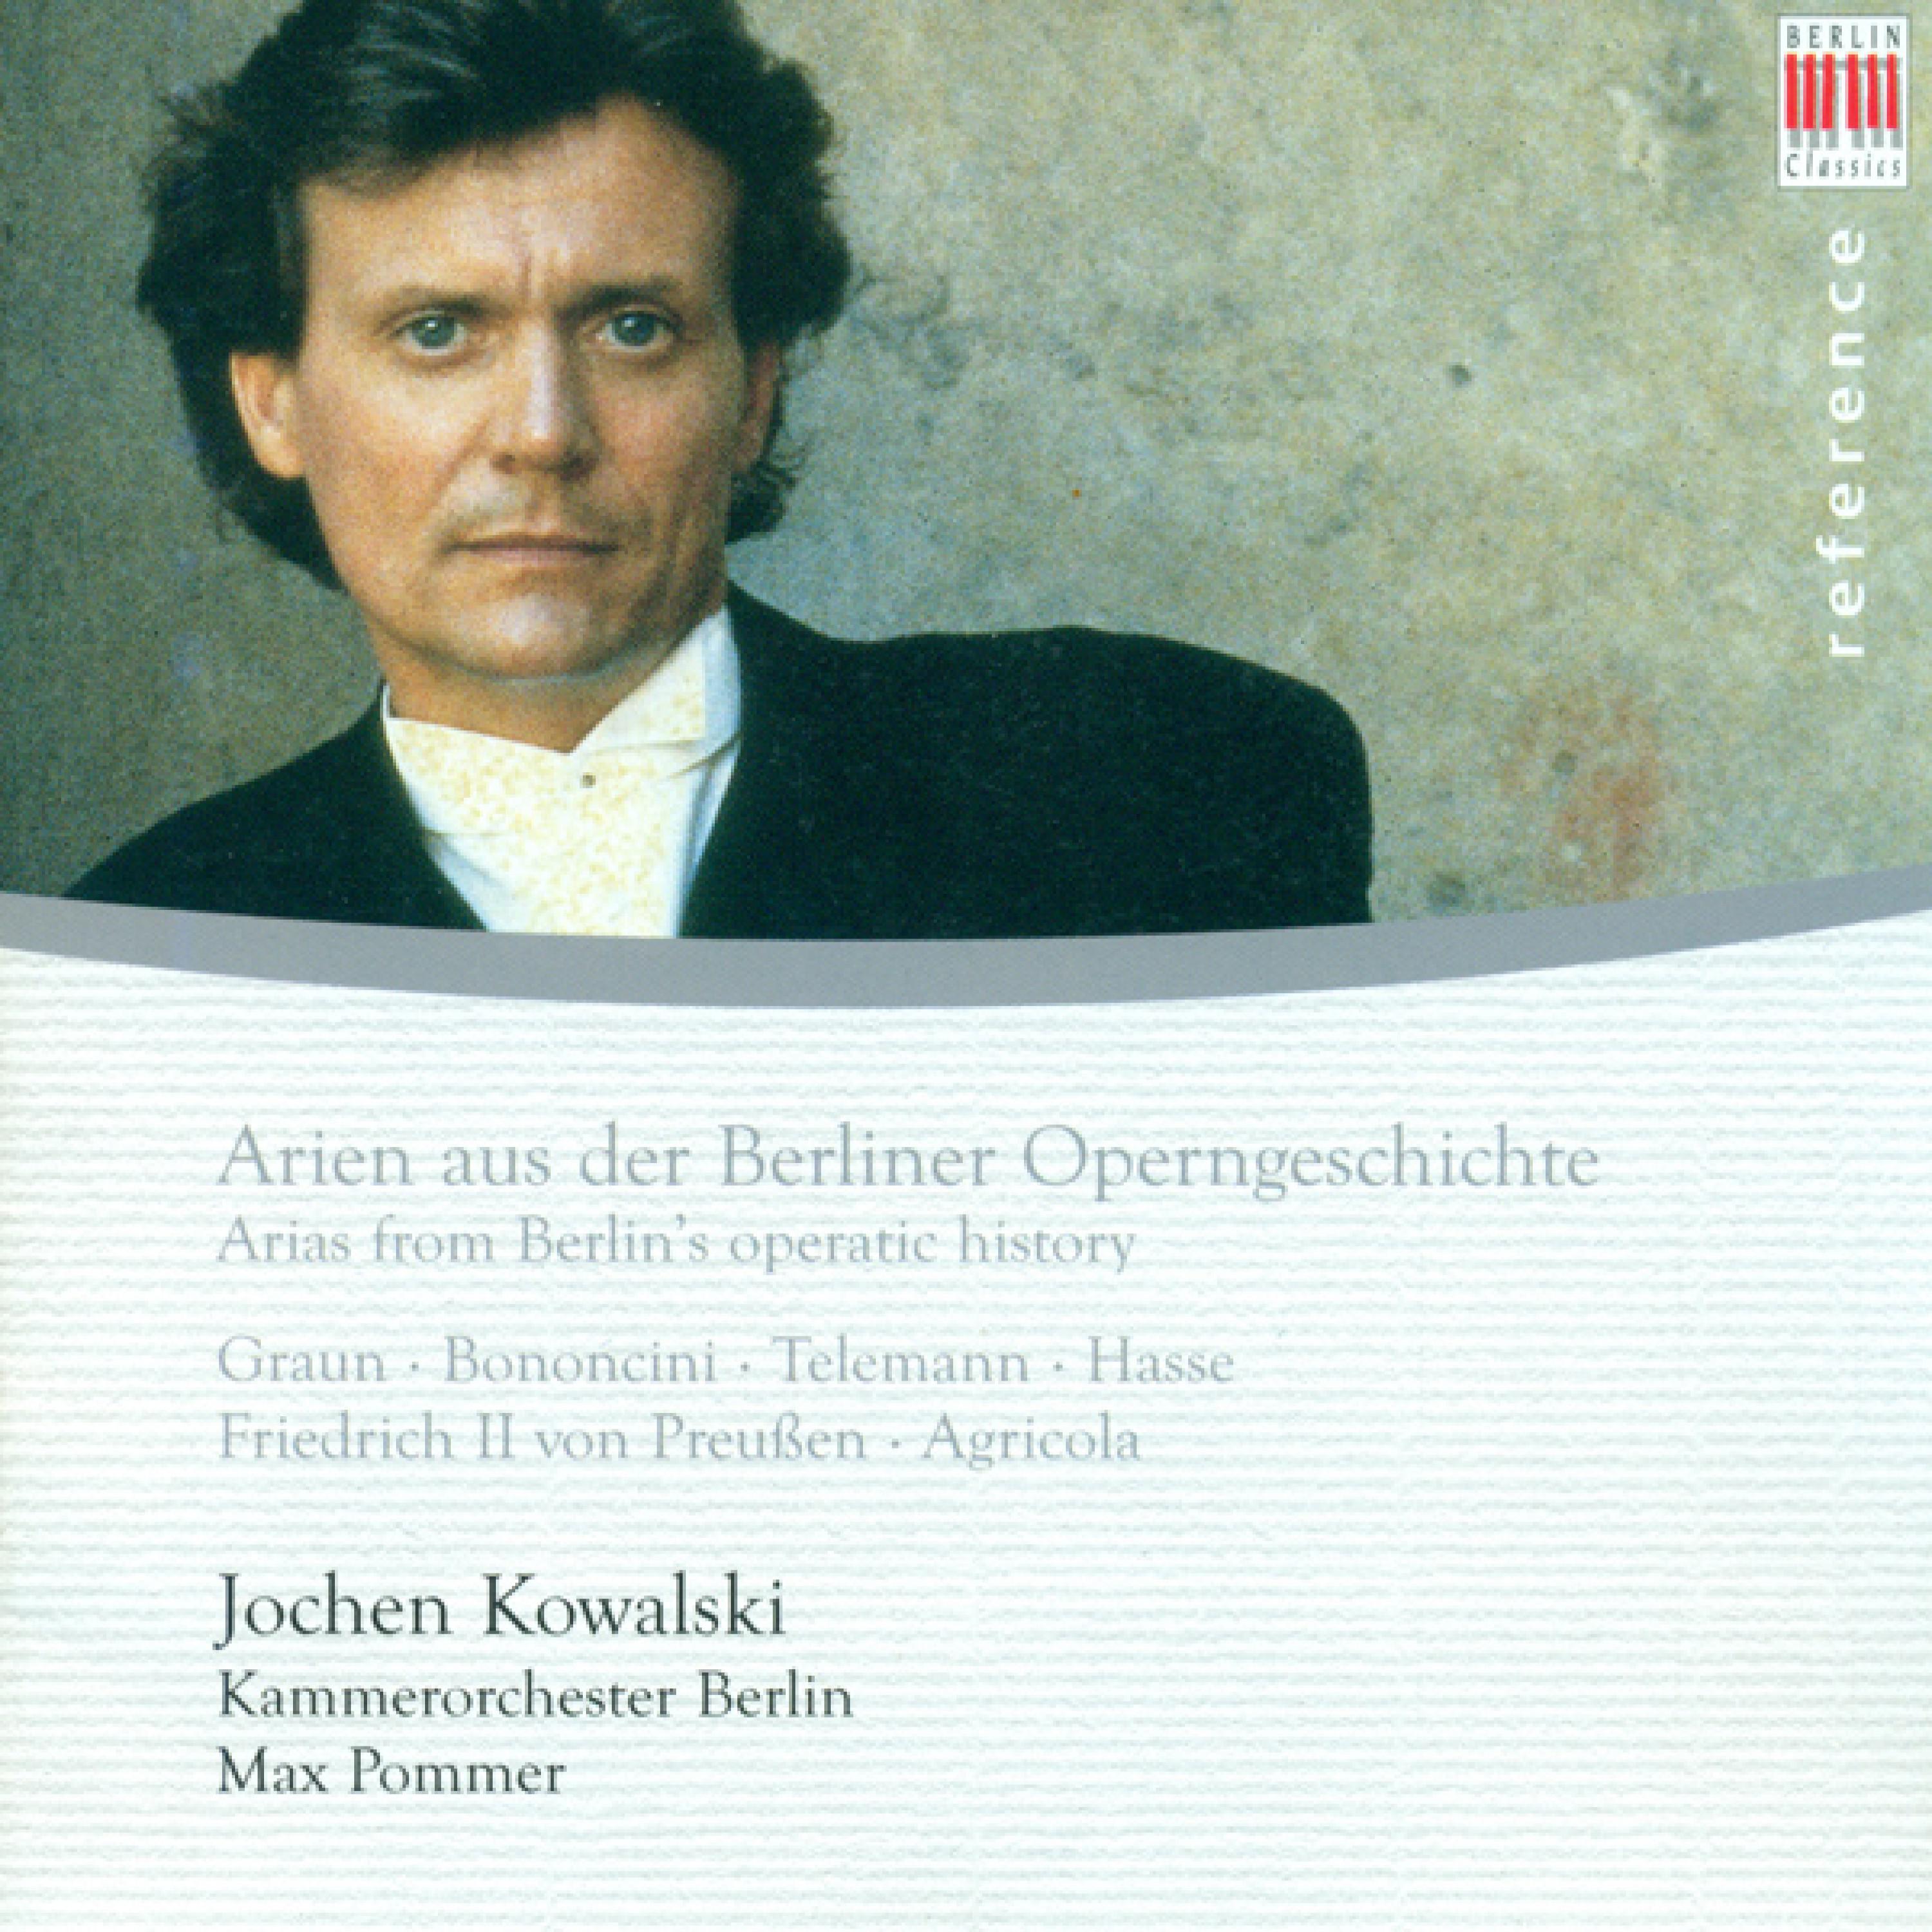 Arias from Berlin's operatic history